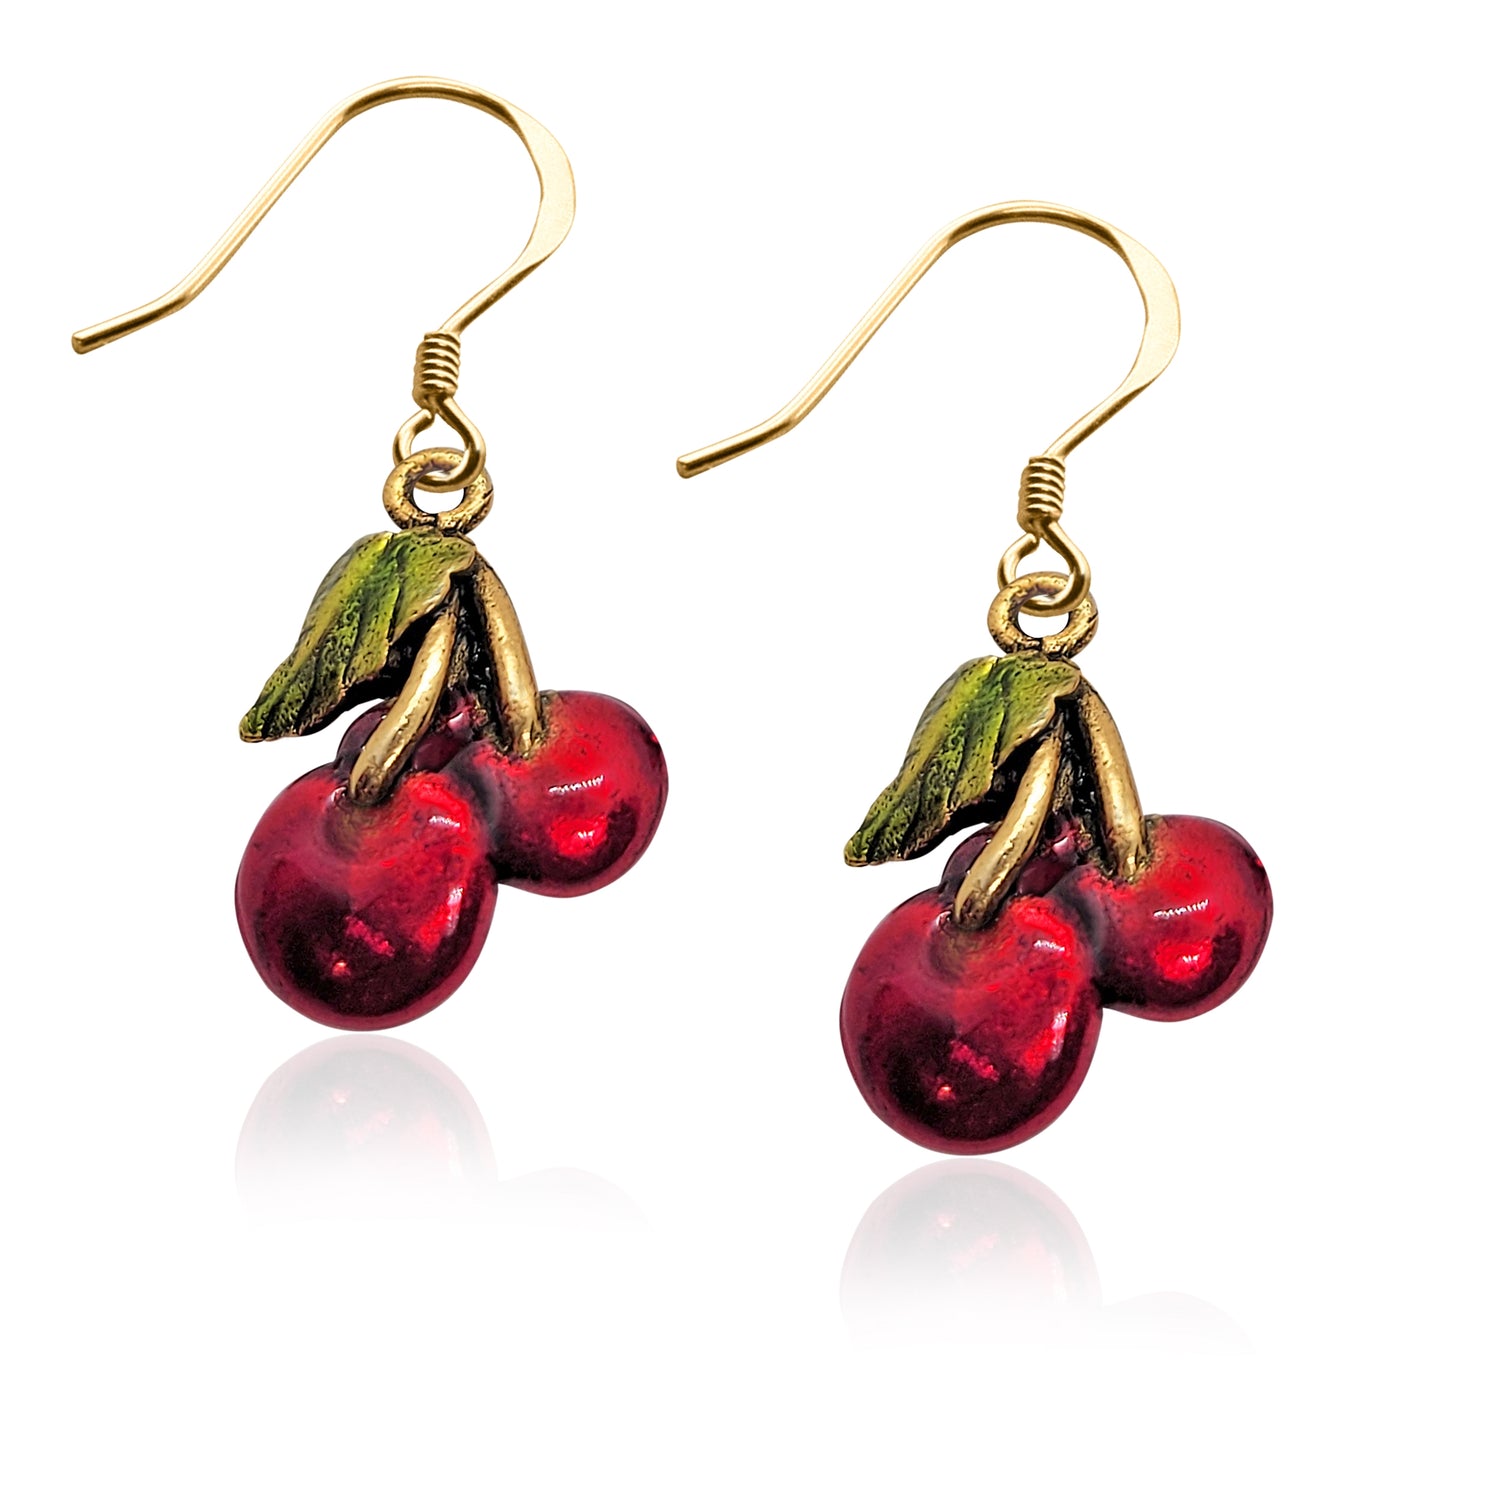 Whimsical Gifts | Cherries Charm Earrings in Gold Finish | Hobbies & Special Interests | Casino | Gaming | Game Night | Jewelry